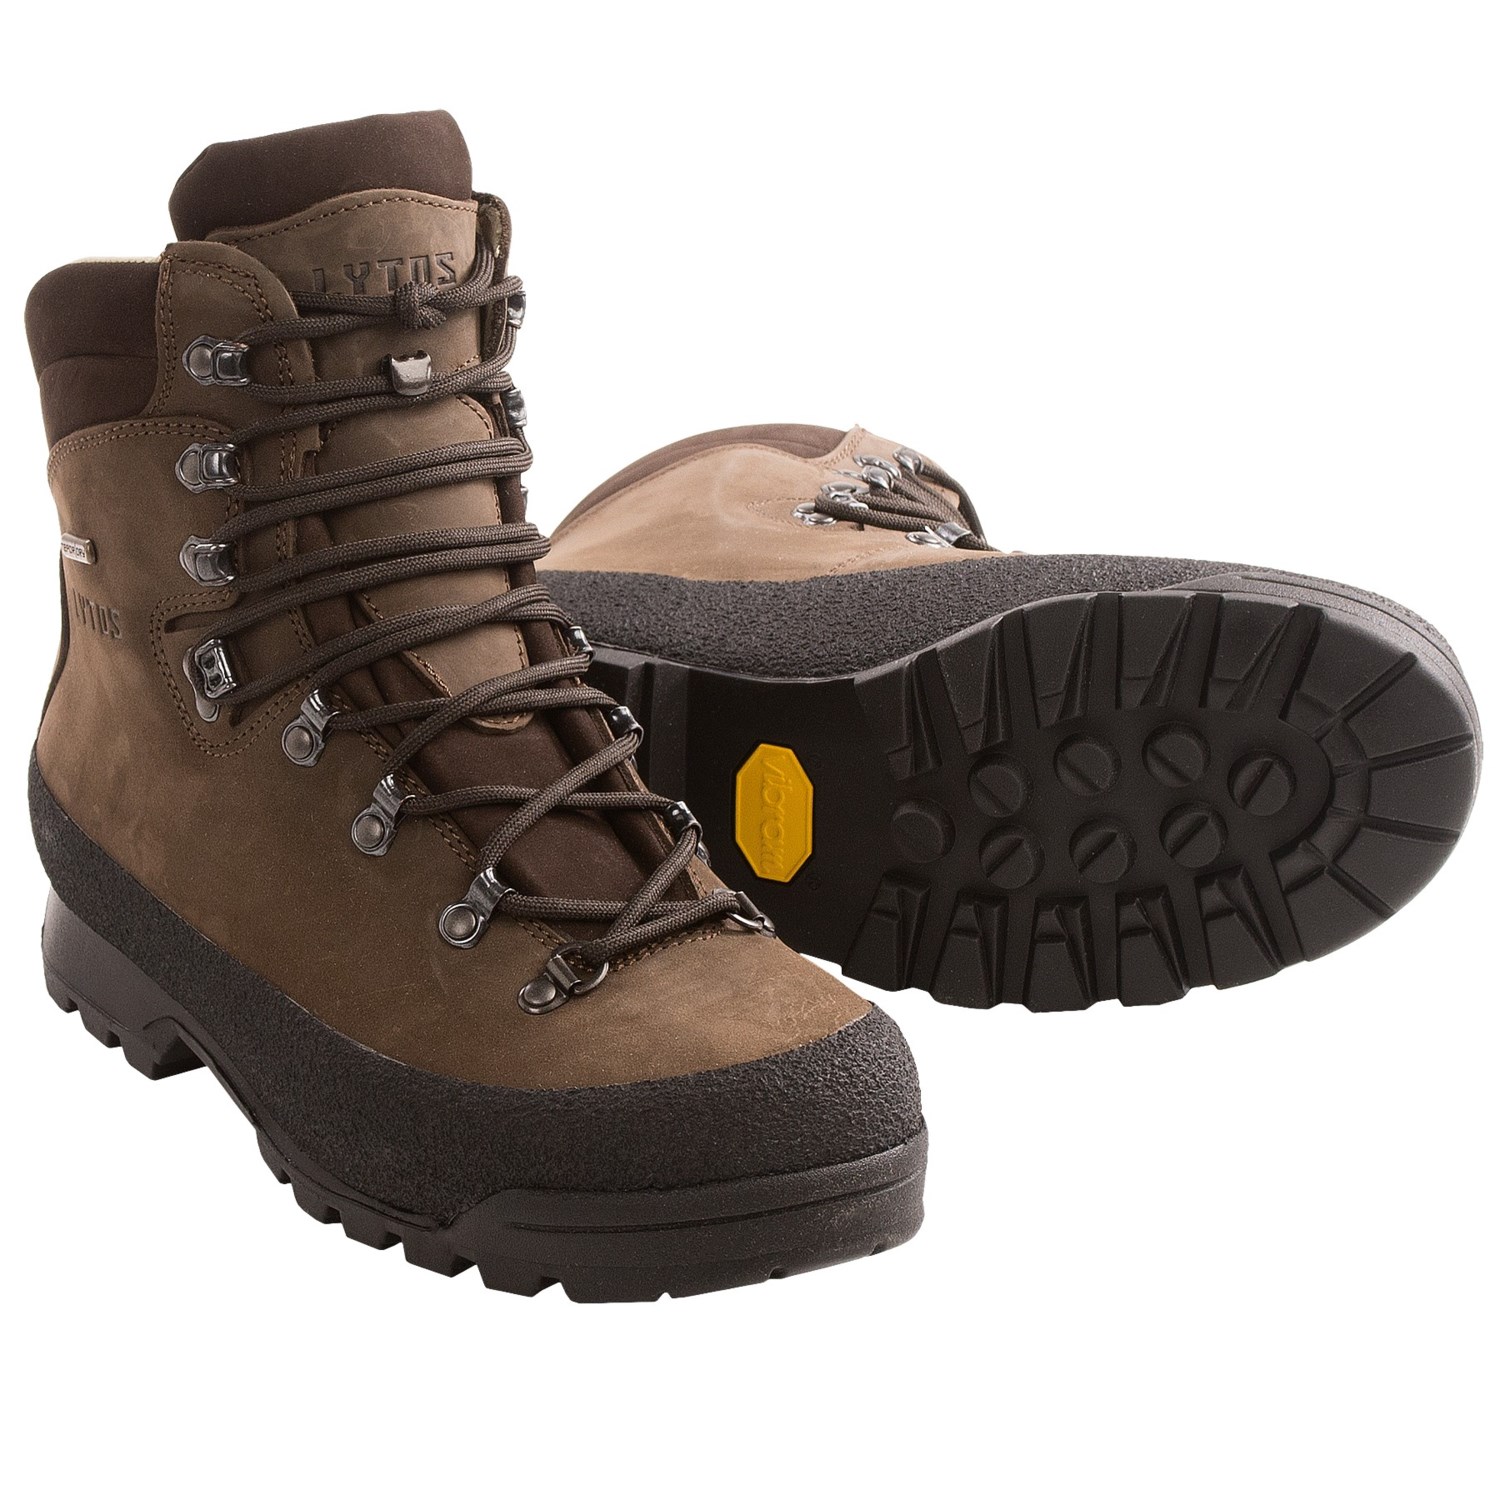 Lytos Tonale Fas Heavyweight Hiking Boots (For Men) 7695T - Save 53%